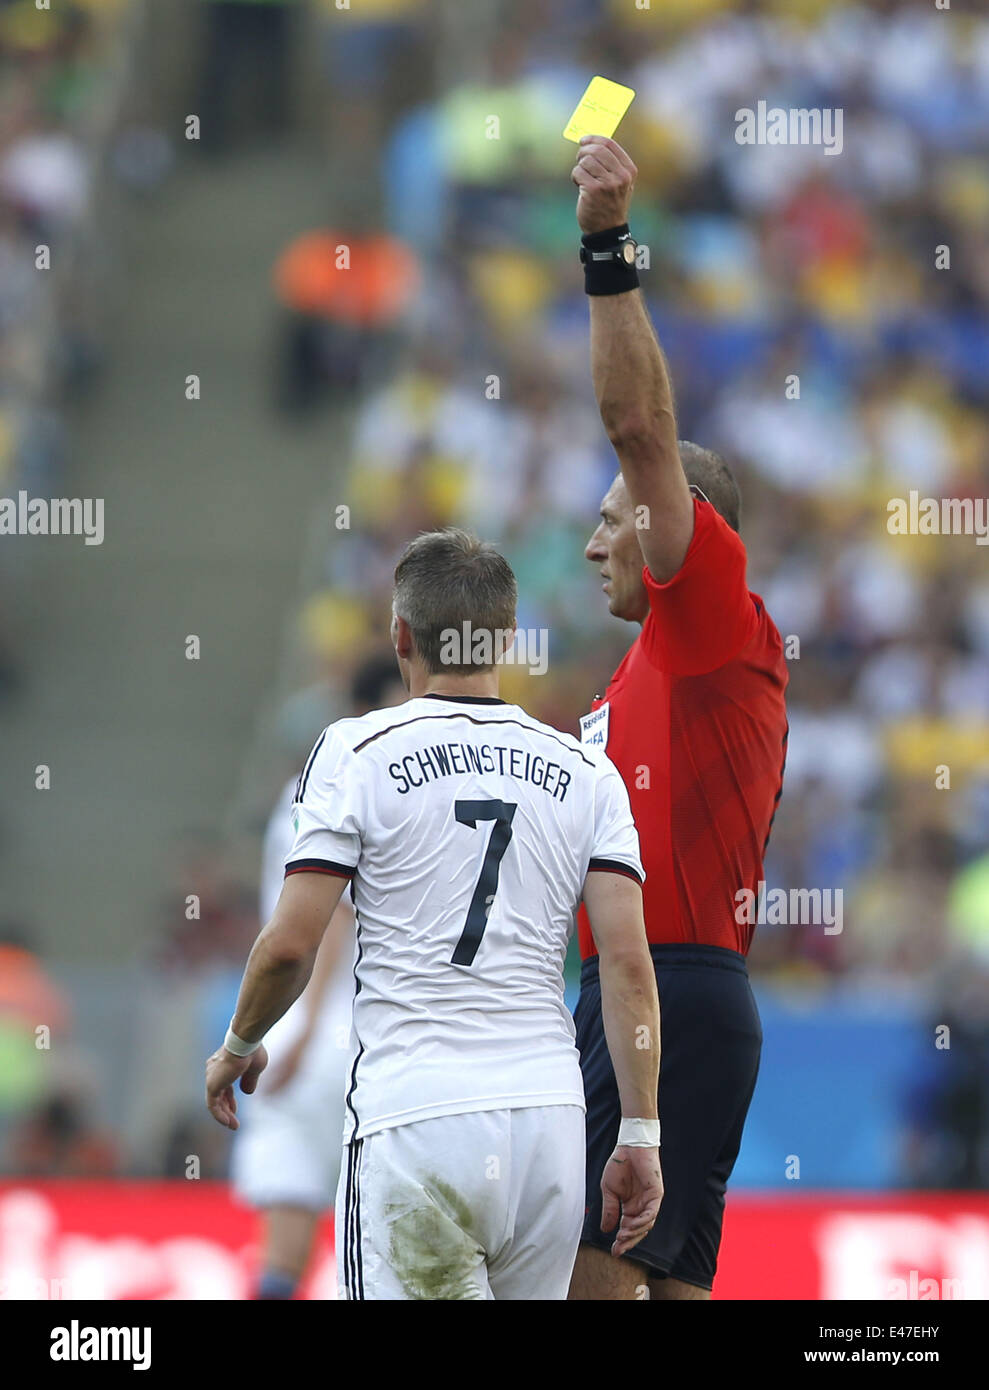 Rio De Janeiro, Brazil. 4th July, 2014. Argentina's referee Nestor Pitana (R) shows a yellow card to Germany's Bastian Schweinsteiger during a quarter-finals match between France and Germany of 2014 FIFA World Cup at the Estadio do Maracana Stadium in Rio de Janeiro, Brazil, on July 4, 2014. Germany won 1-0 over France and qualified for semi-finals on Friday. Credit:  Wang Lili/Xinhua/Alamy Live News Stock Photo